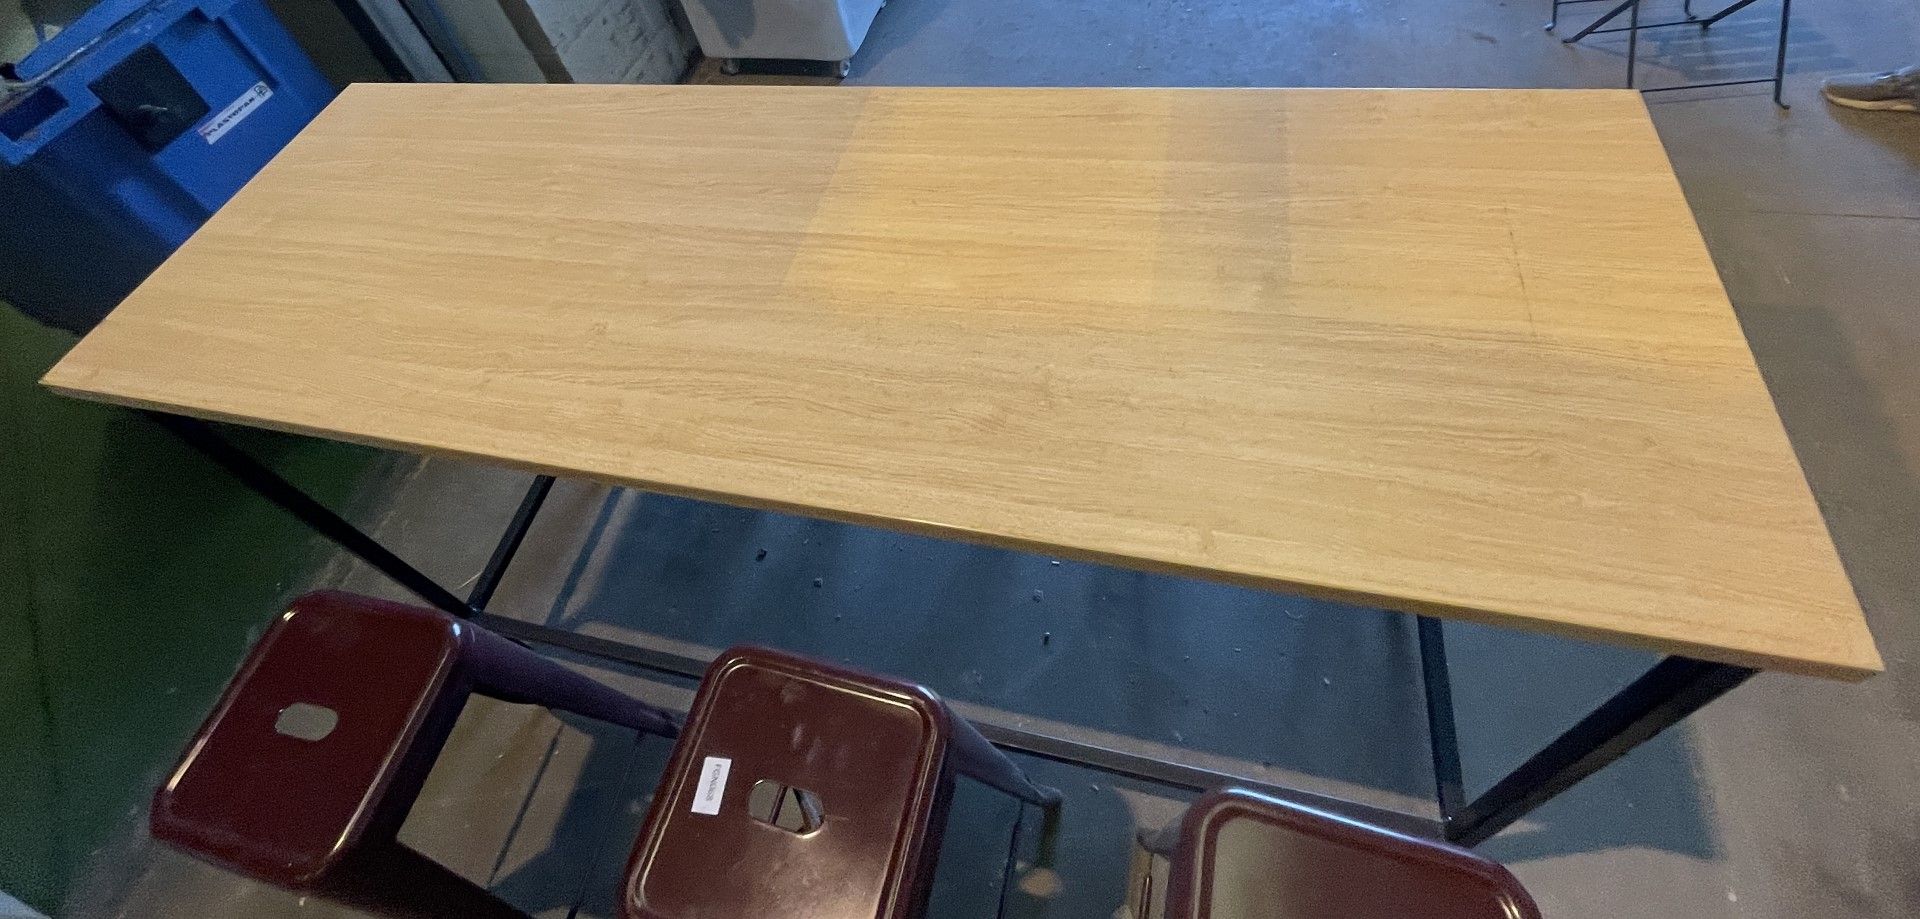 1 x Rectangular Bar Table And 6 x Metal Bar Stools - Ref: FGN068 - CL834 - Location: Essex, RM19 Dim - Image 5 of 9